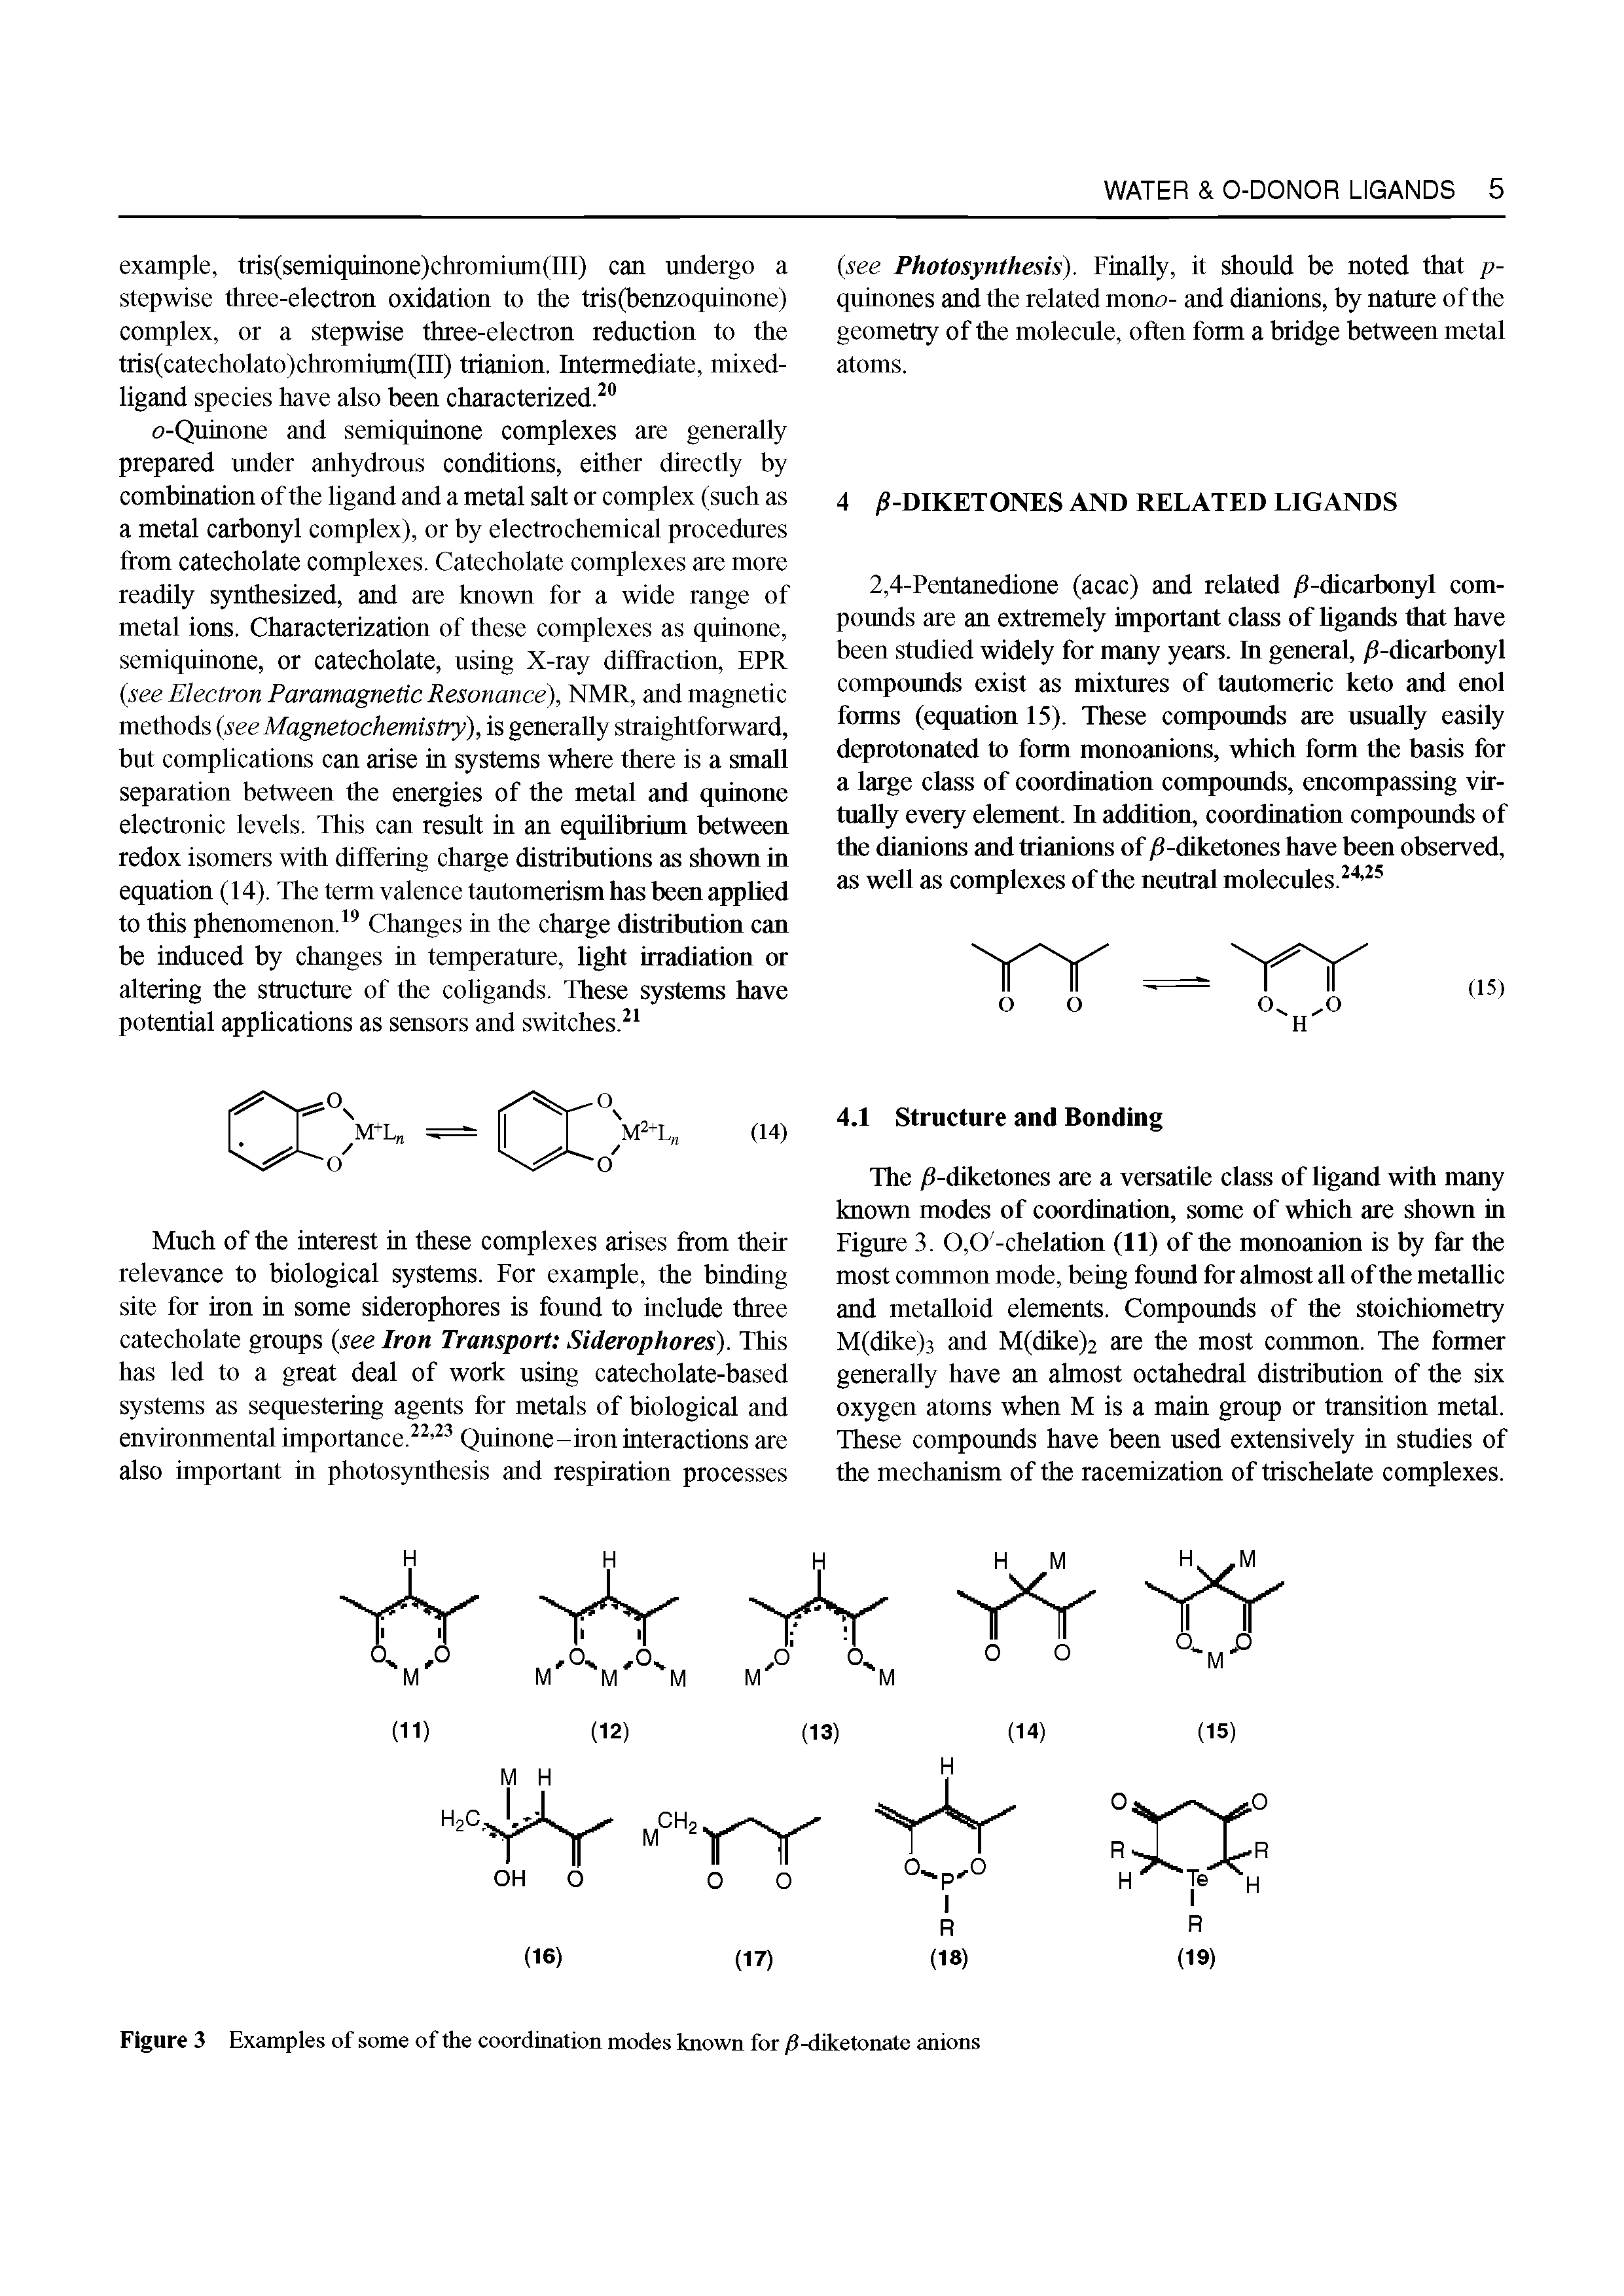 Figure 3 Examples of some of the coordination modes known for S-diketonate anions...